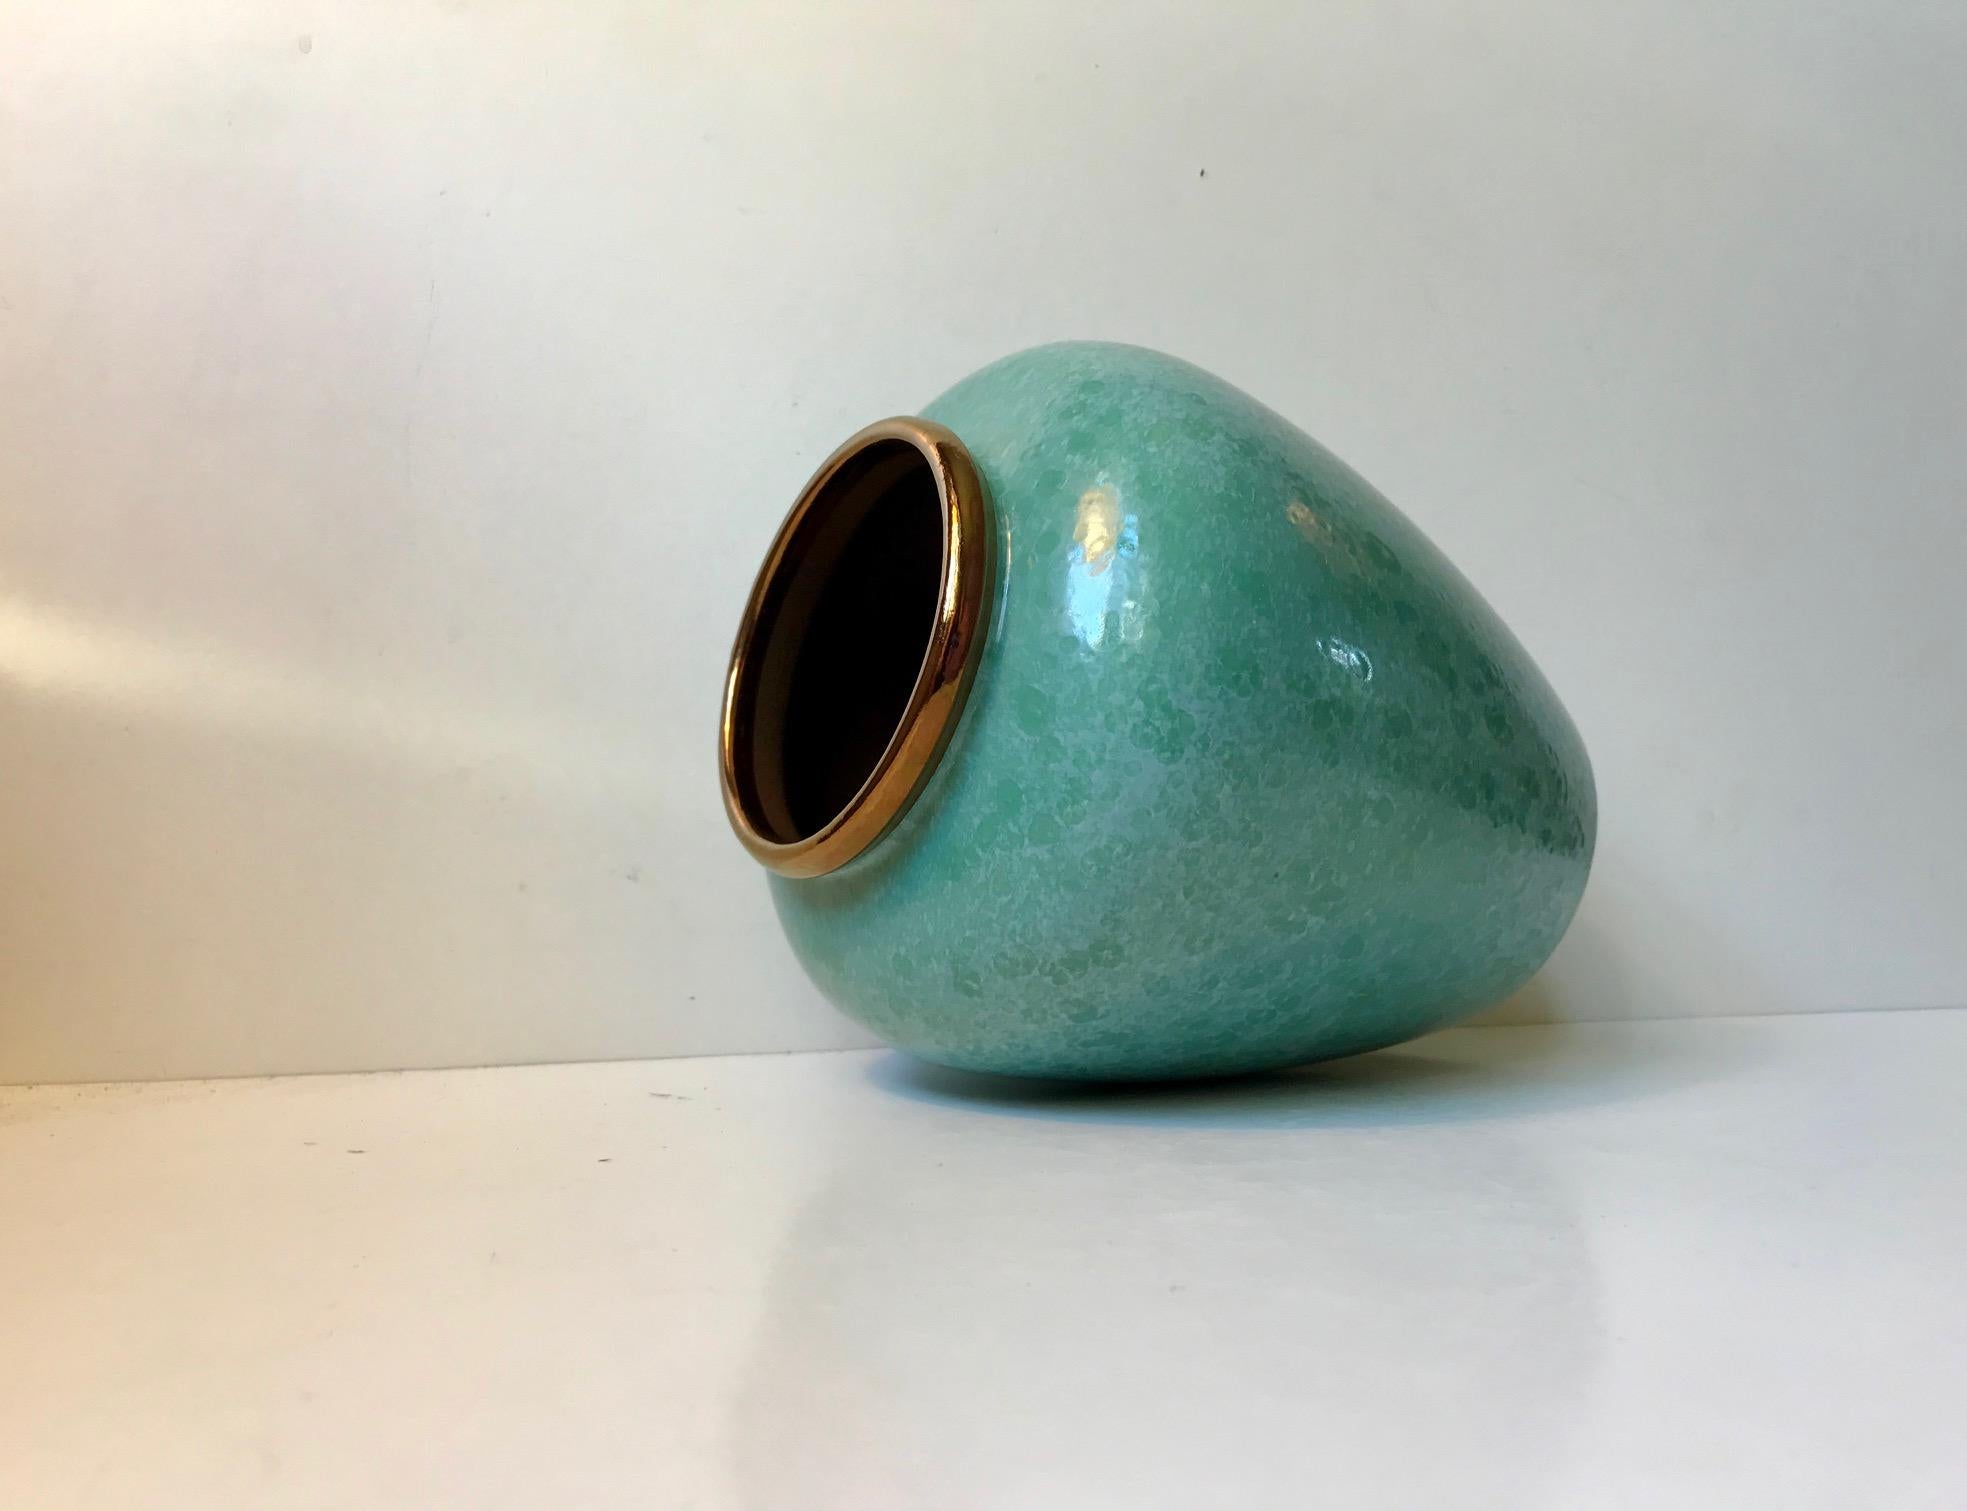 - Large baluster shaped vase or urn 
- Cloudy speckled green glaze and an edge with copper/bronze glaze
- Anonymous Scandinavian maker in the style of Ewald Dahlskog - Bo Fajans.